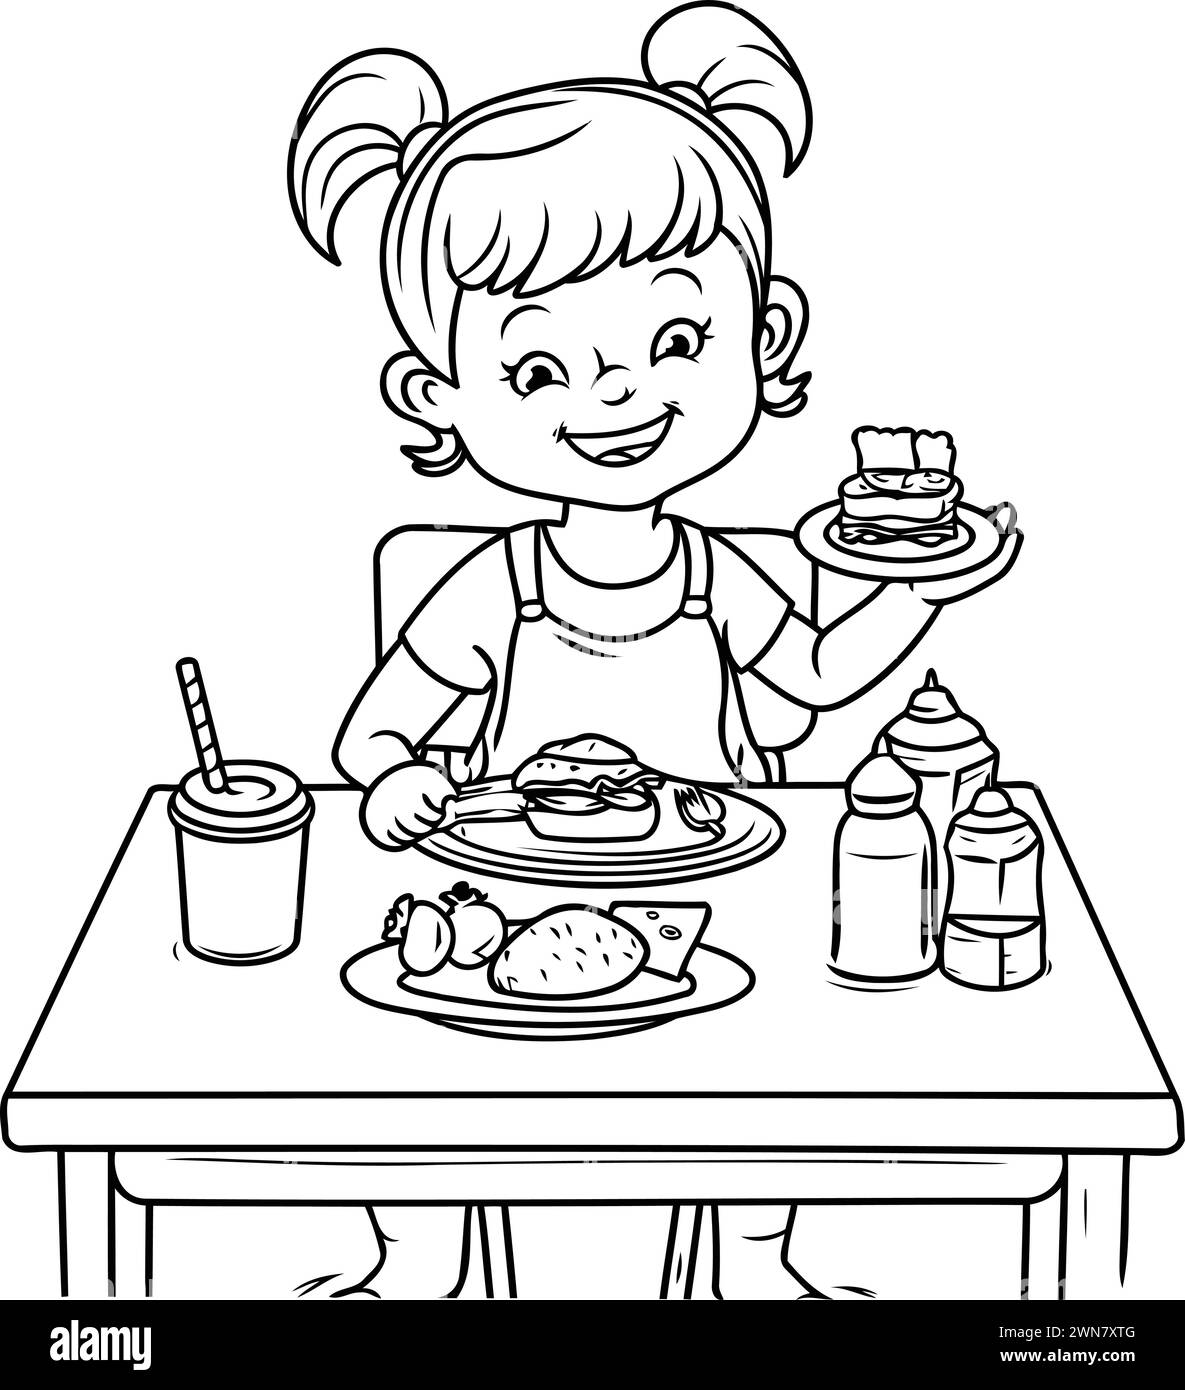 Coloring Page Outline Of a Little Girl Dining at the Table Stock Vector